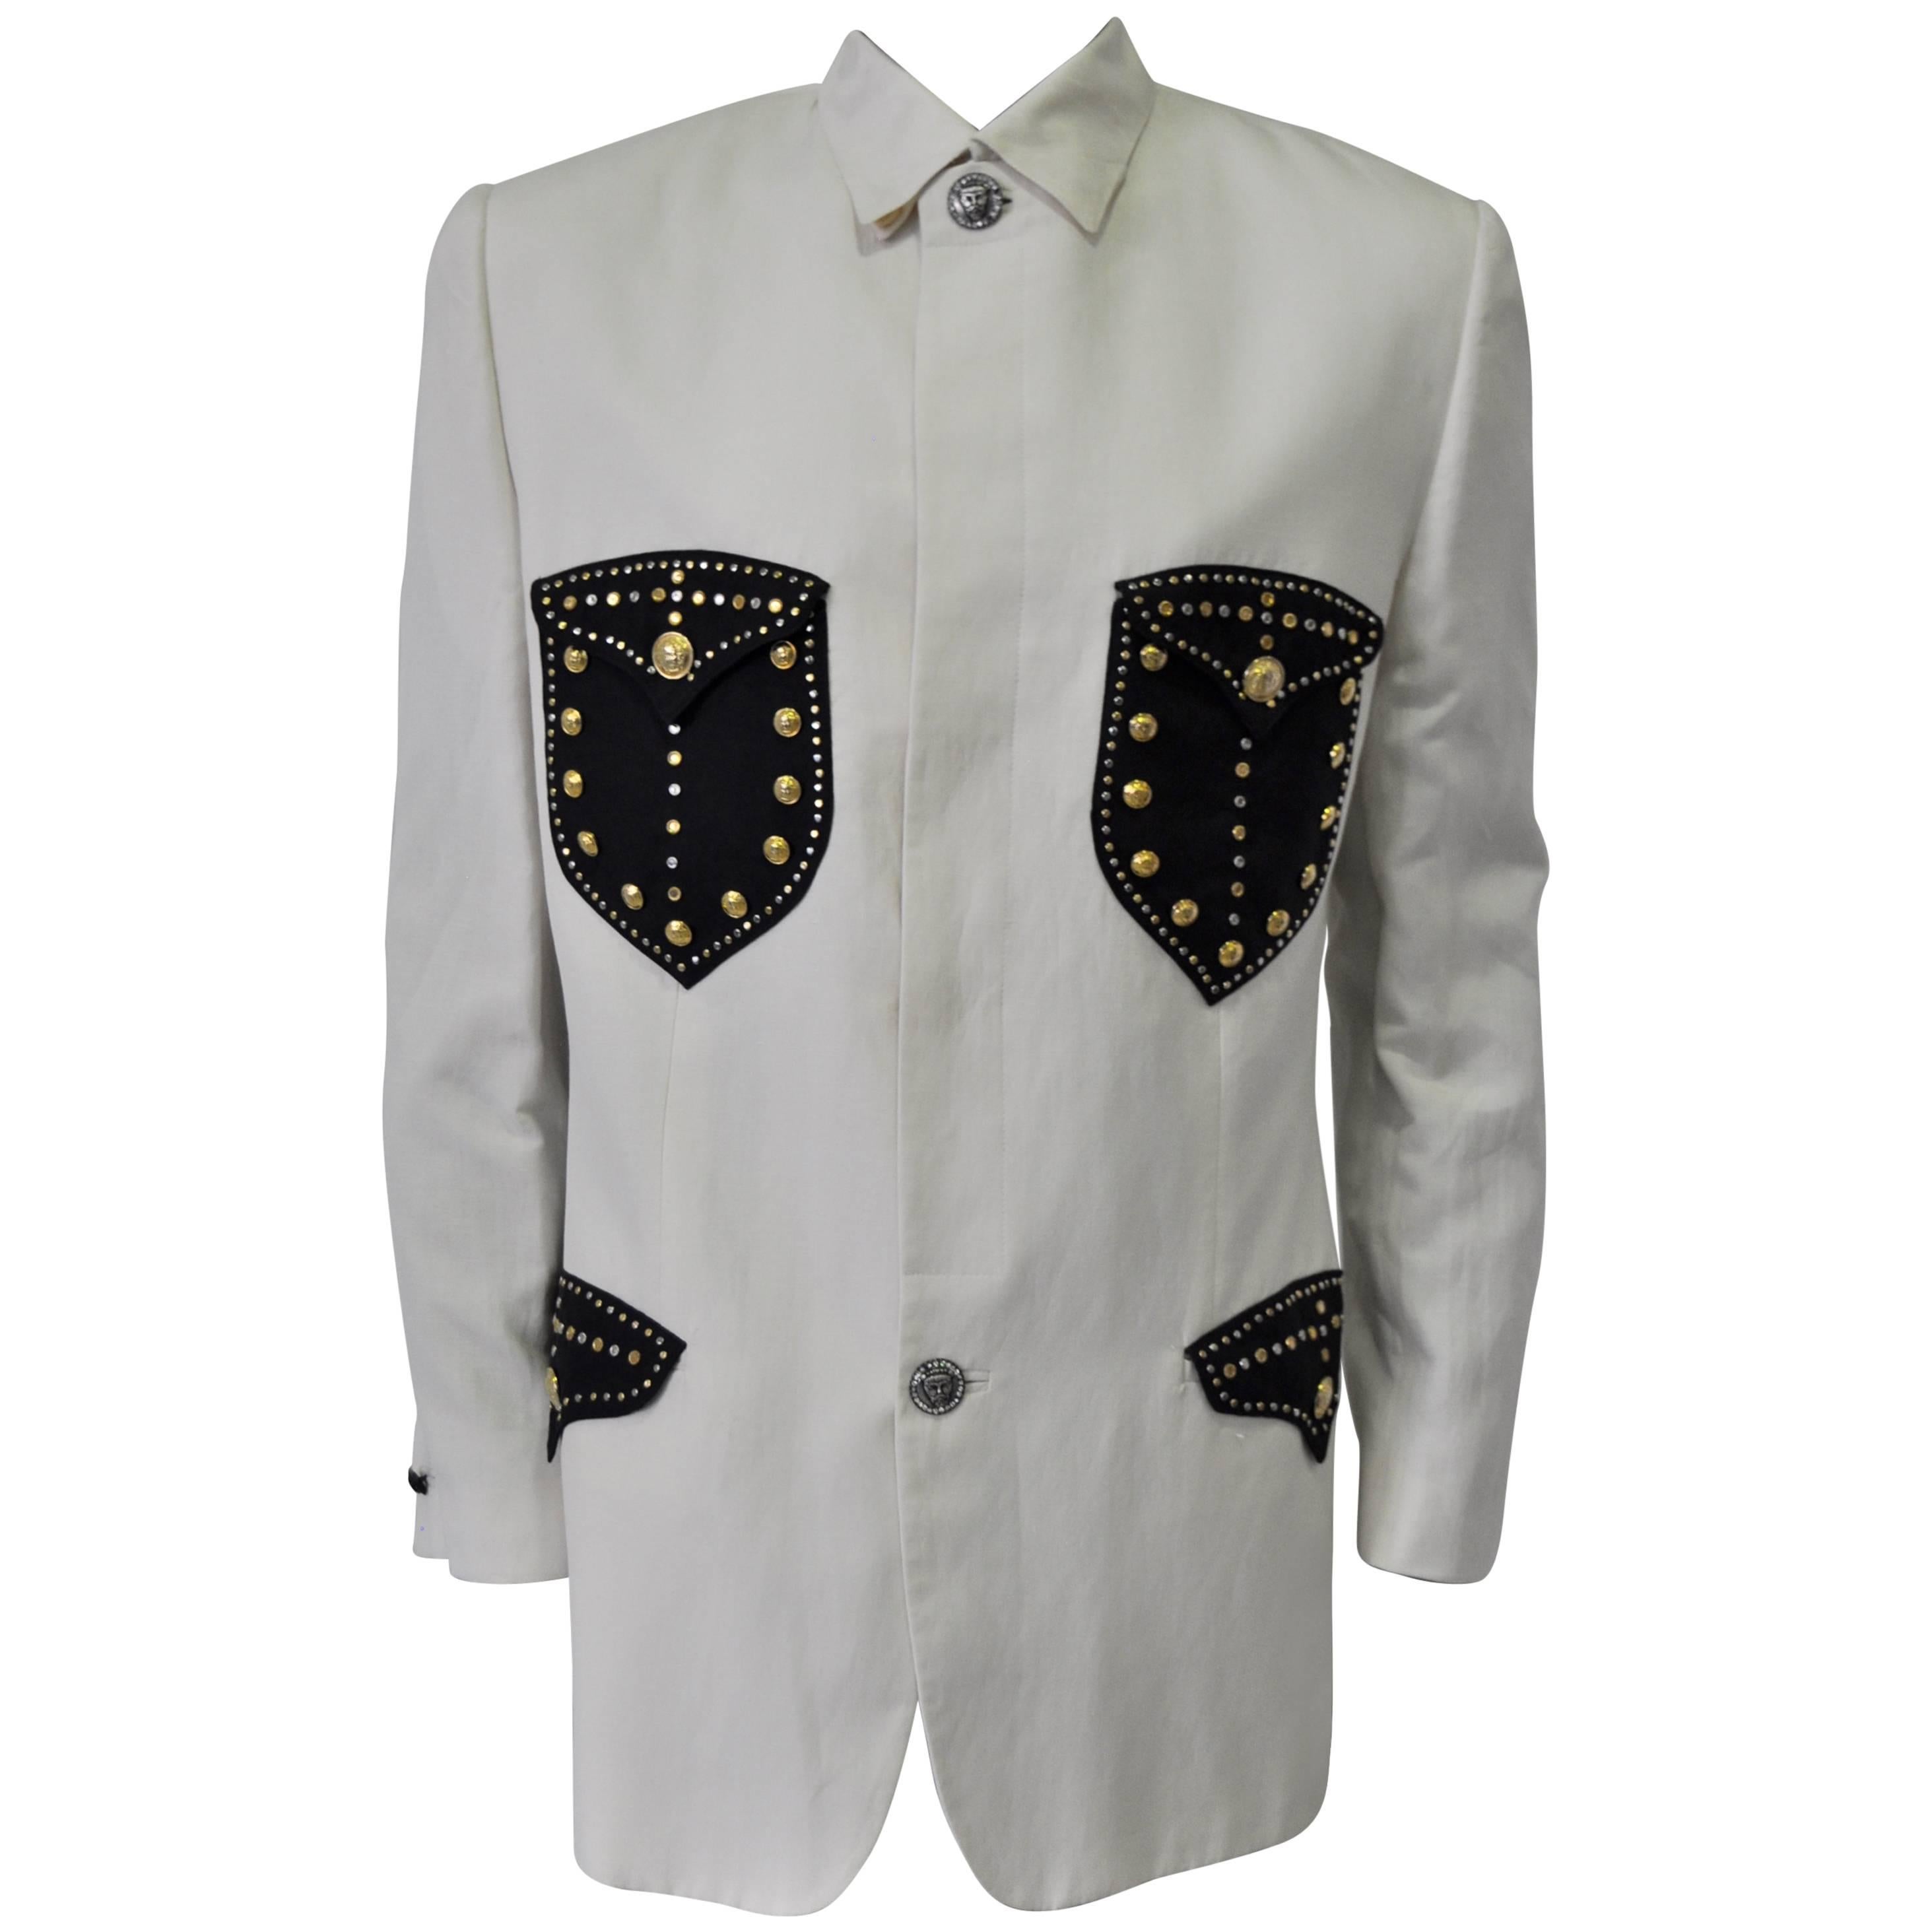 Uber Rare and Important Studded Pocket and Placket Silk/Linen Jacket For Sale